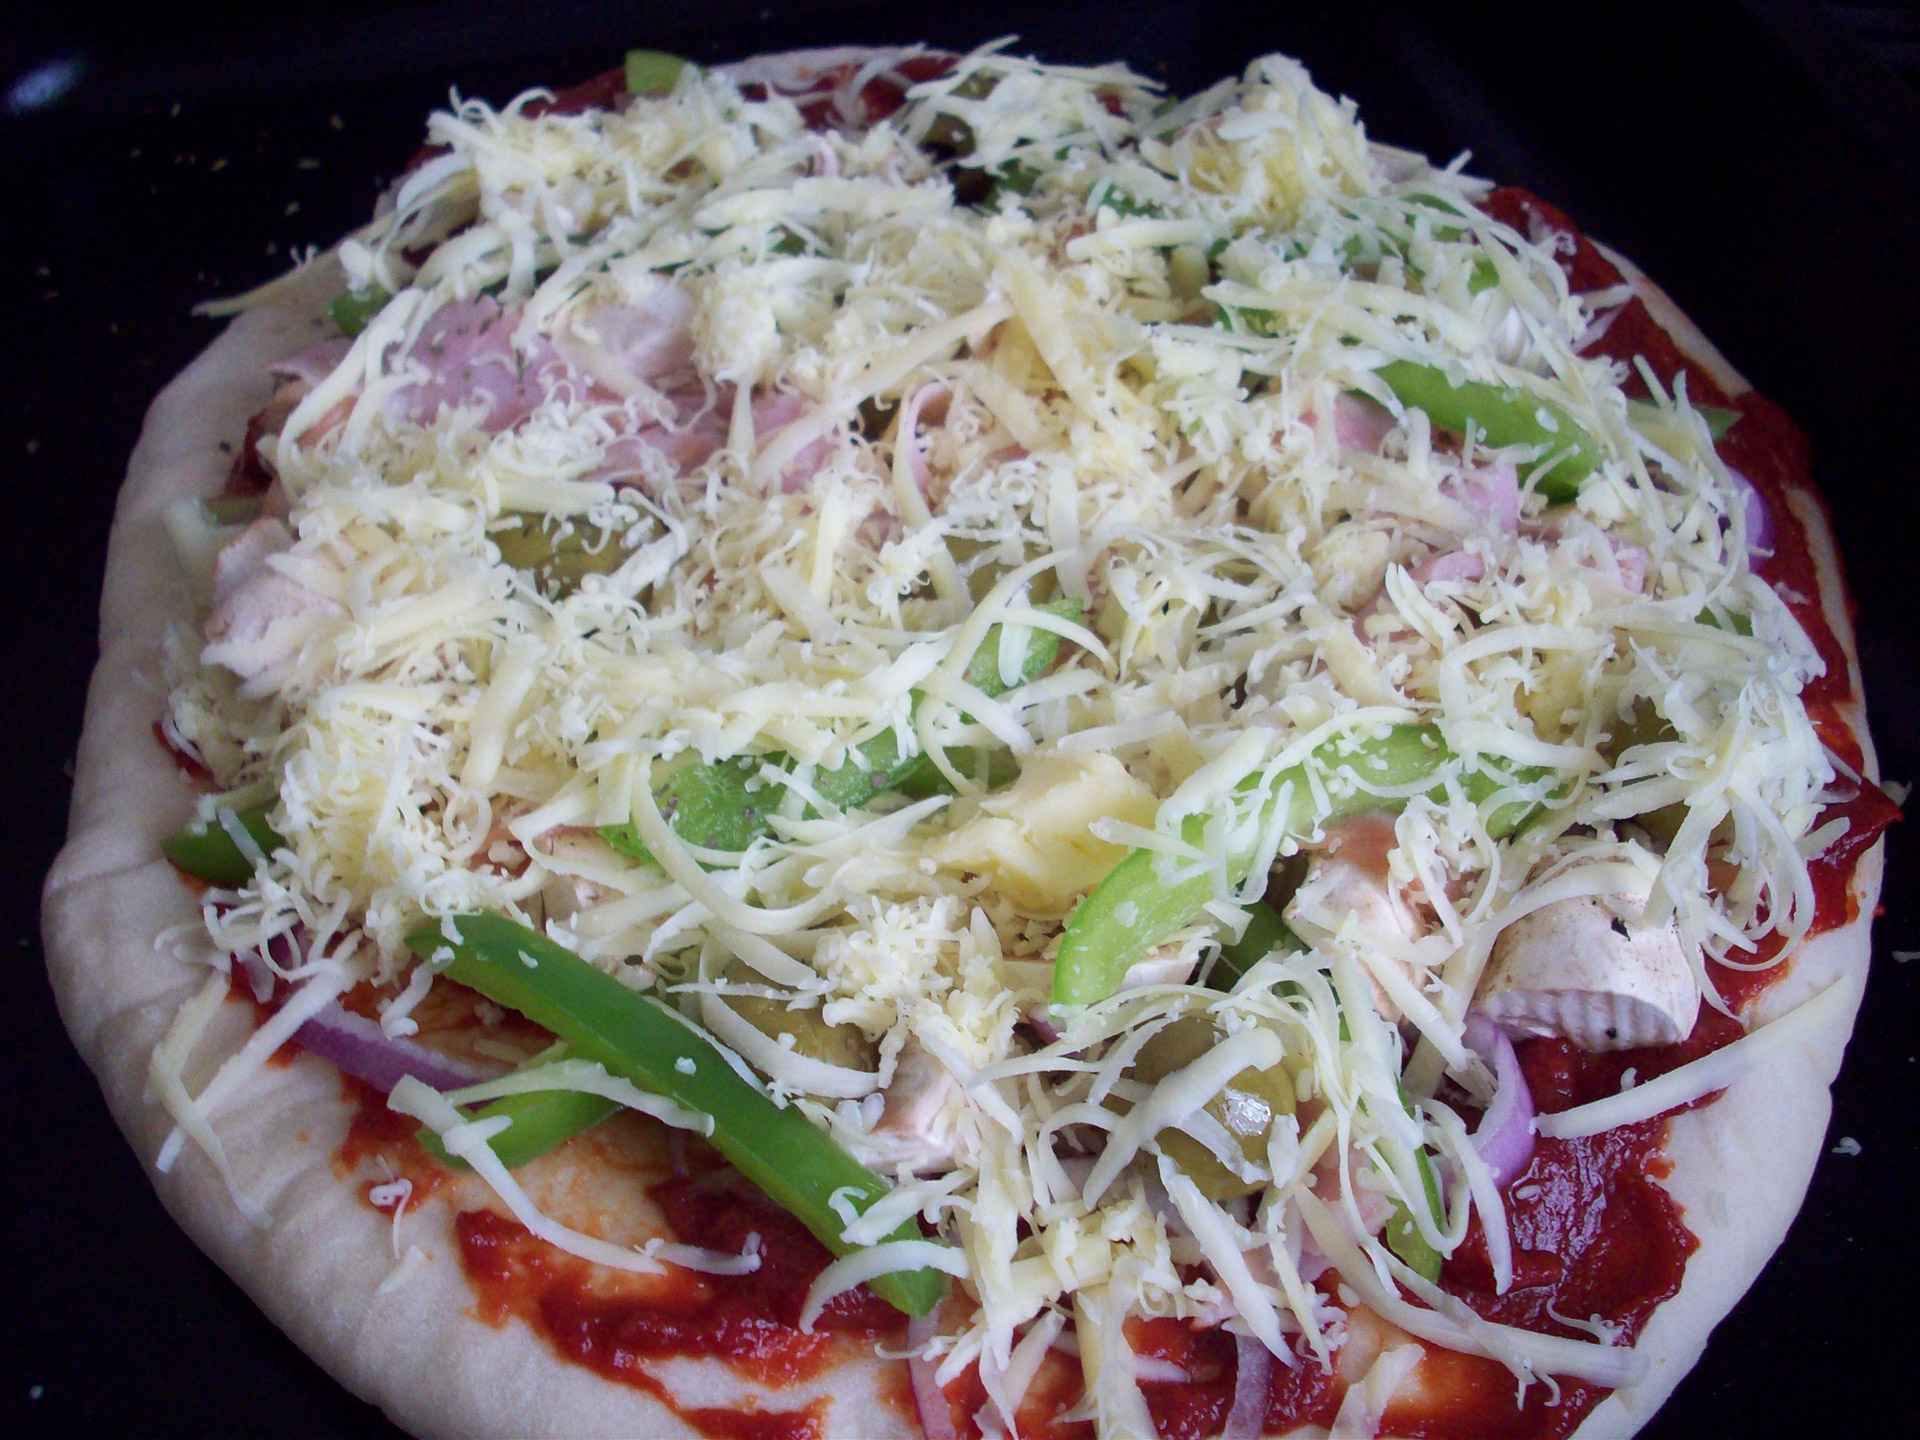 photo of uncooked pizza ready for the oven